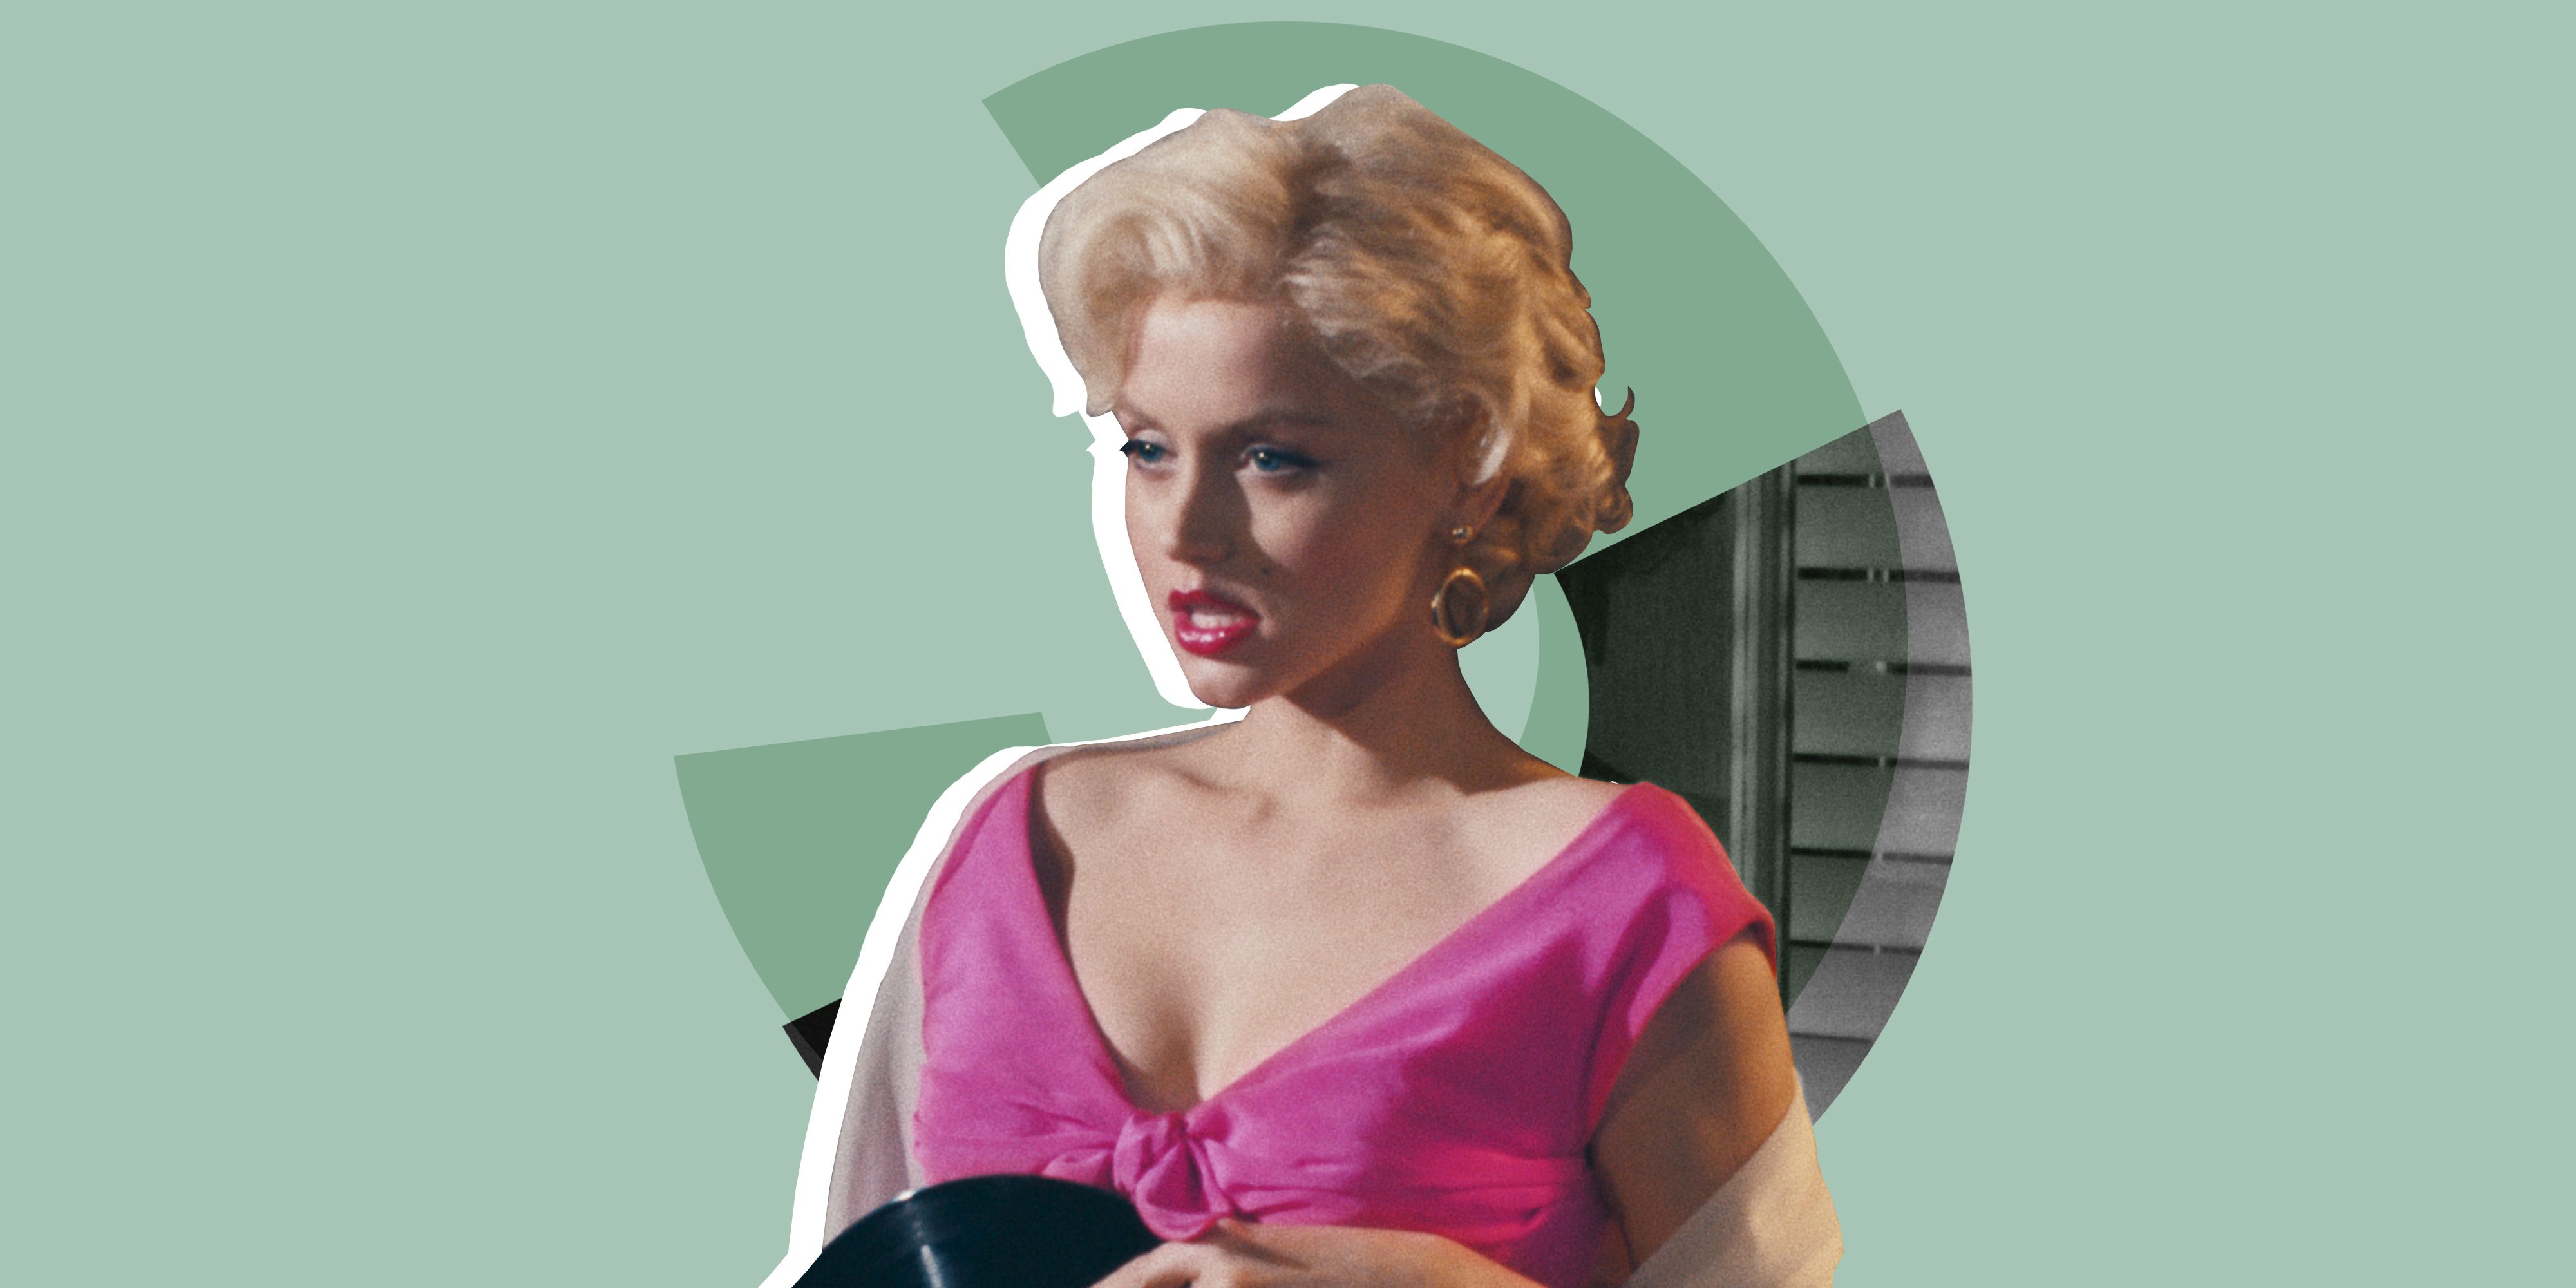 The Marilyn Monroe Movie Blonde: A Monstrous Insult